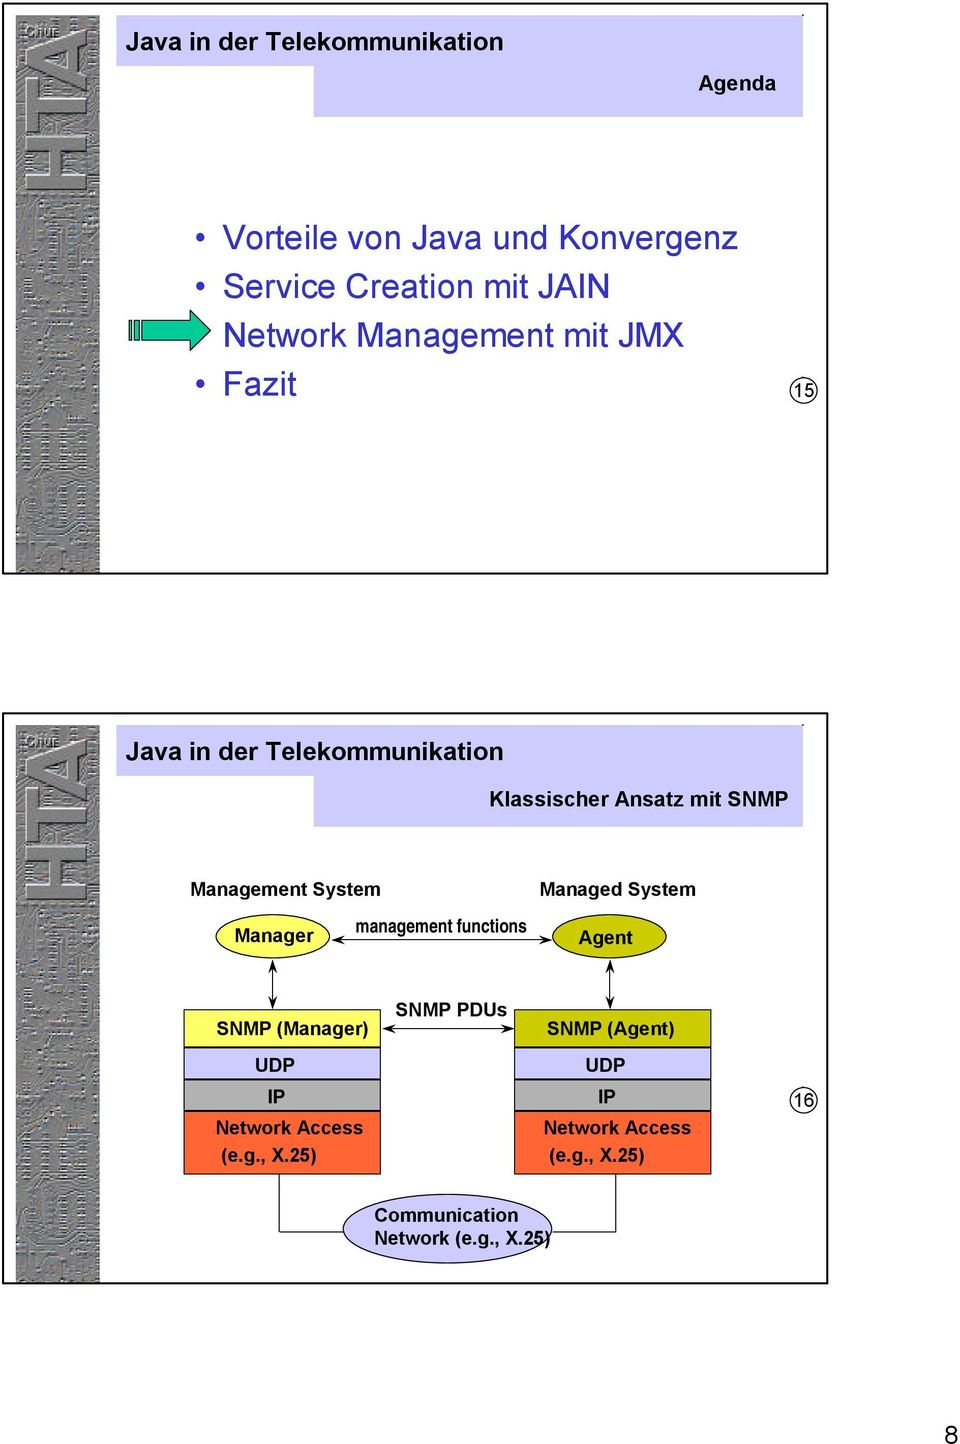 management functions Agent SNMP (Manager) SNMP PDUs SNMP (Agent) UDP IP Network Access